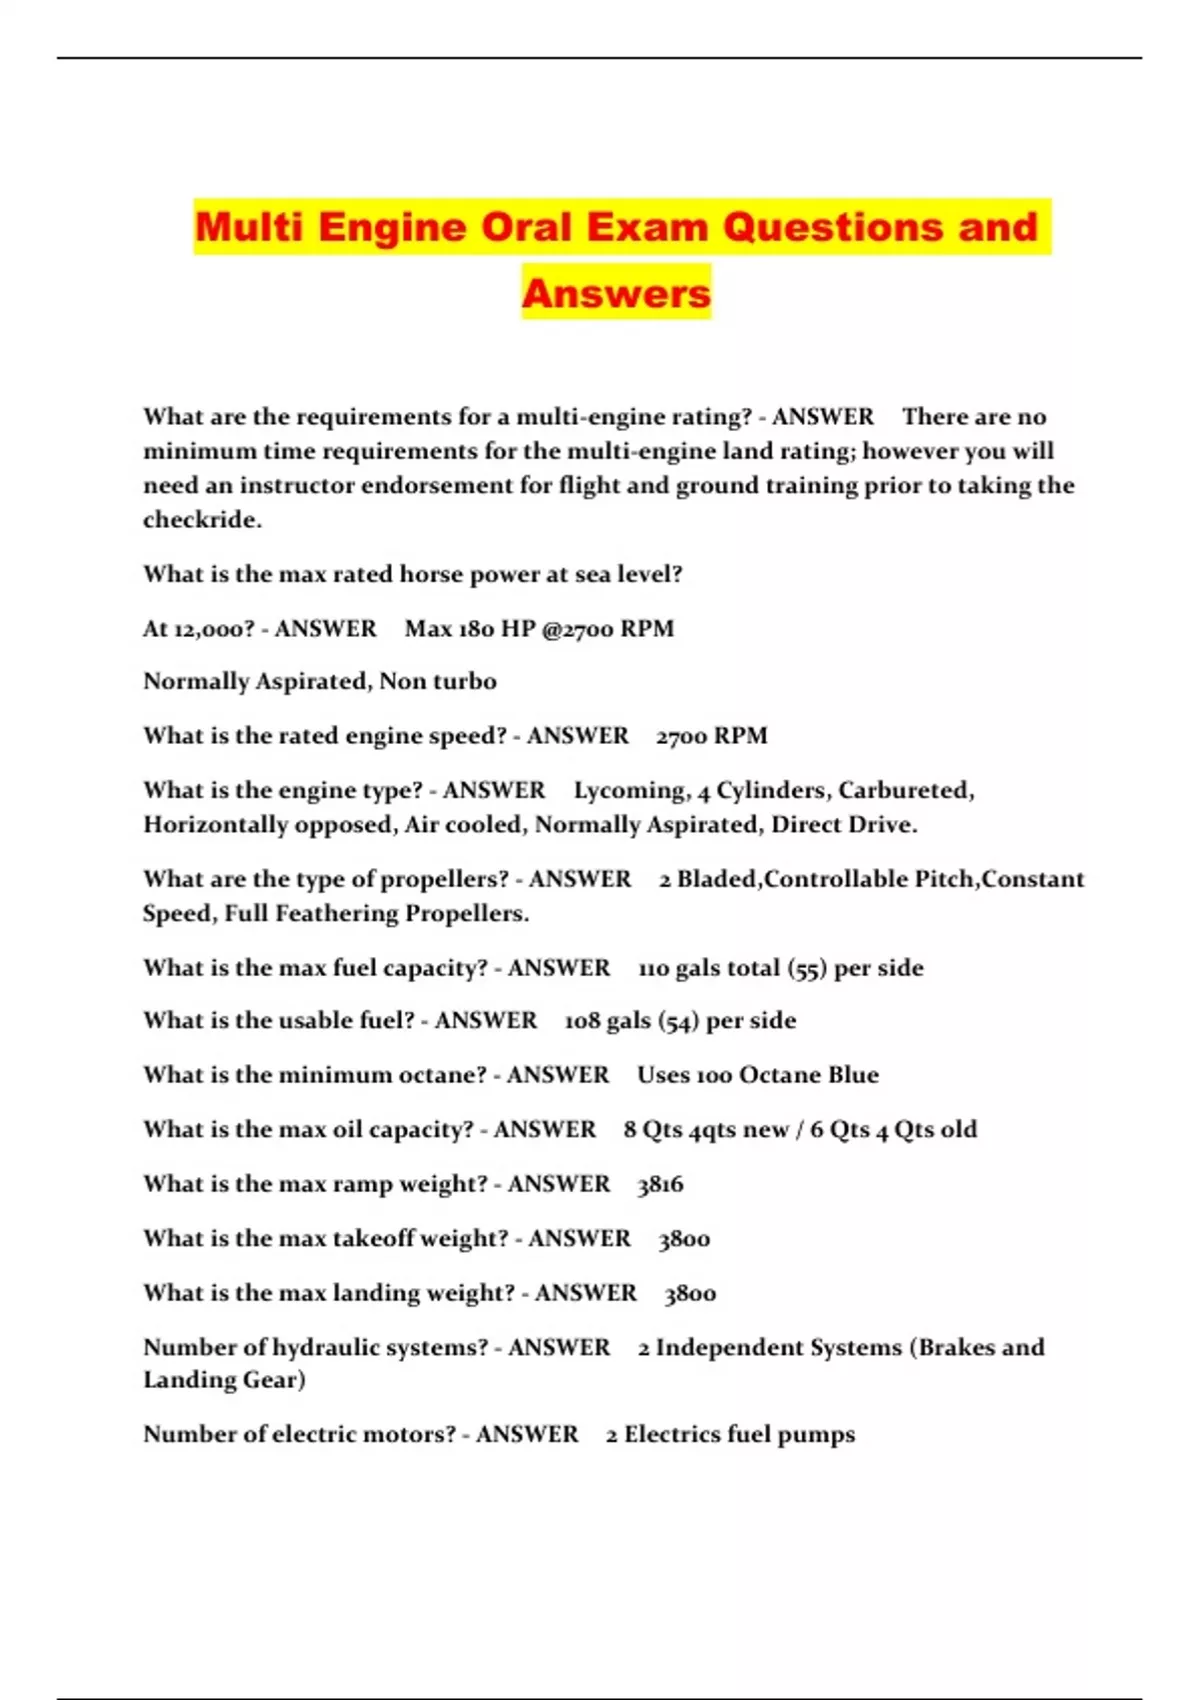 Multi Engine Oral Exam Questions and Answers - Multi Engine Oral